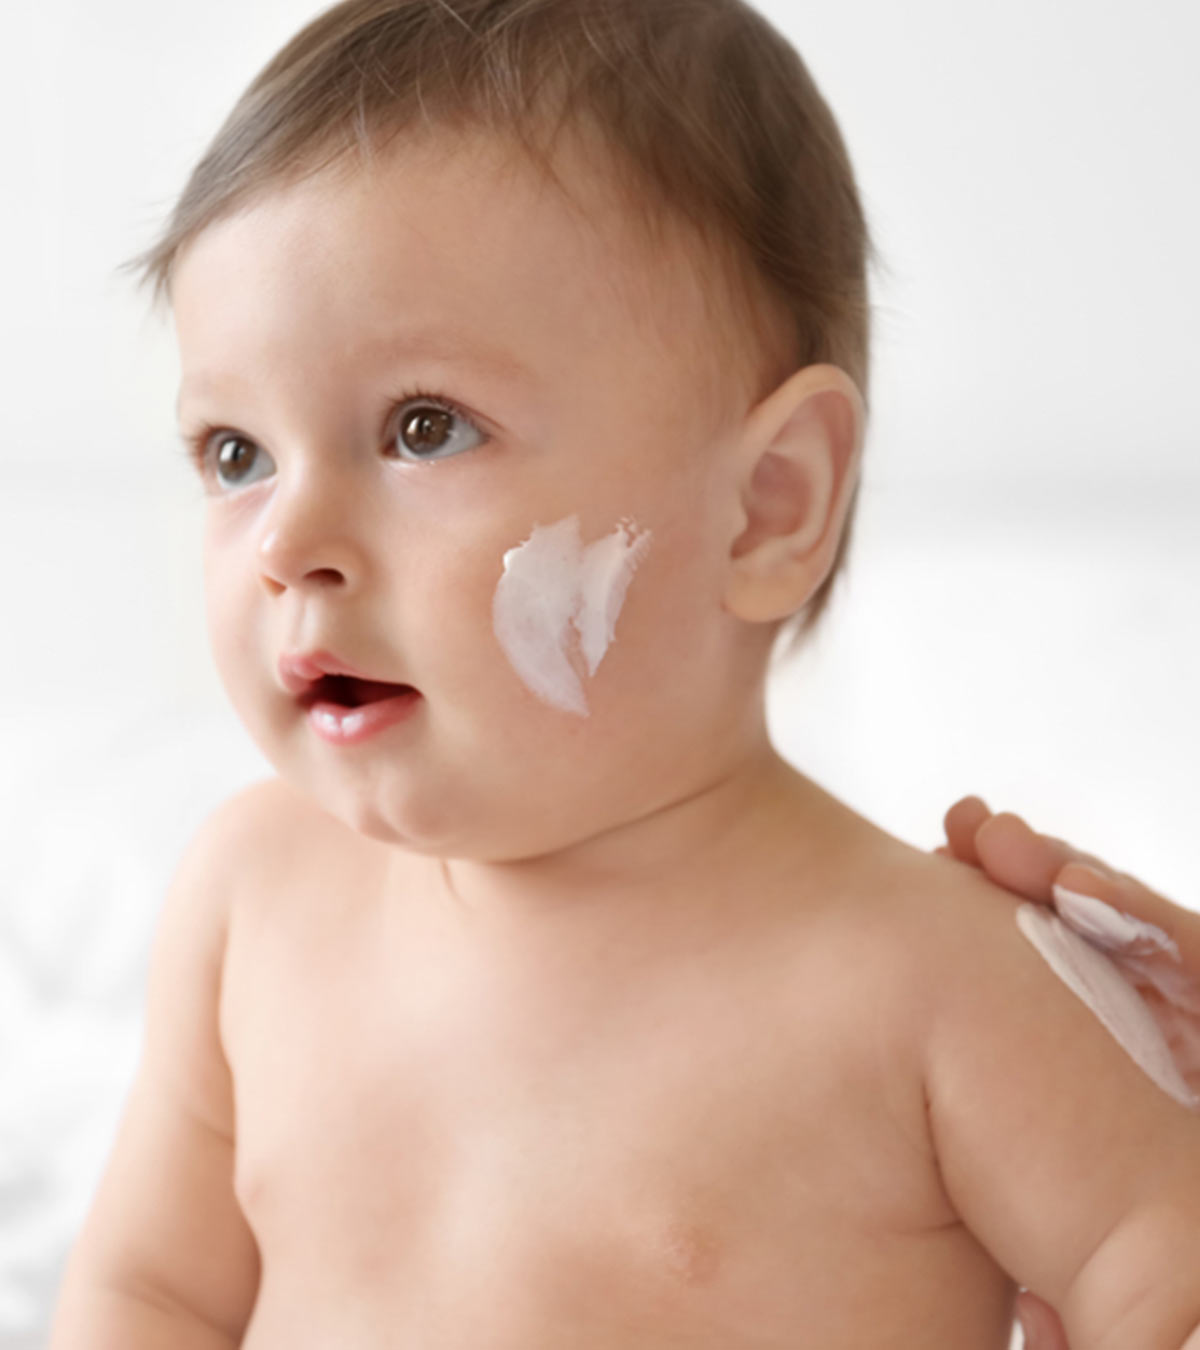 Zinc Oxide For Babies: Safety, Uses And Precautions To Take